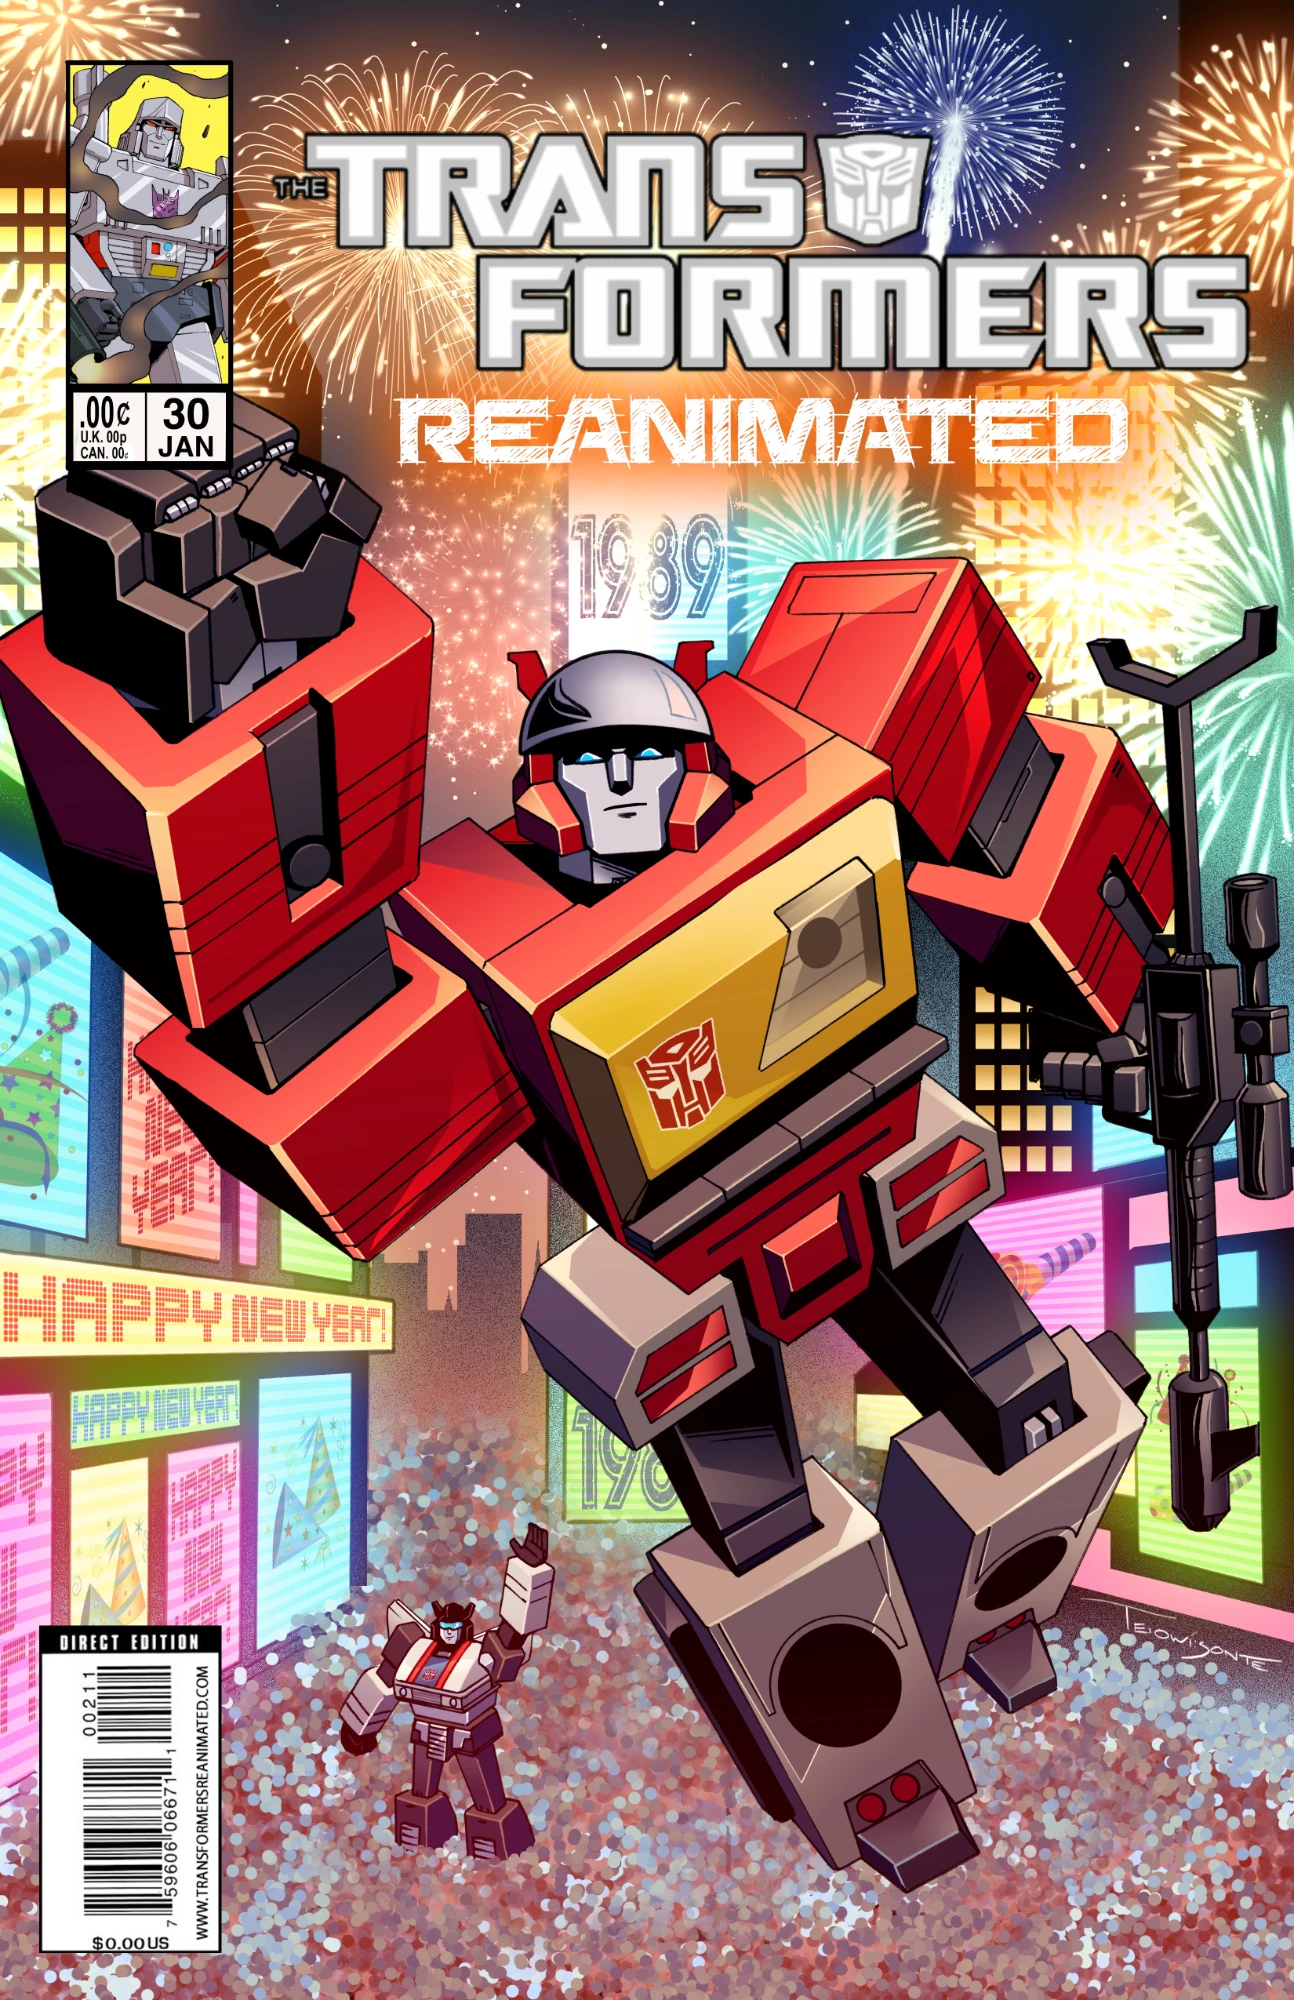 Transformers comic cover in New York on New Year's Eve with Blaster flying through the air